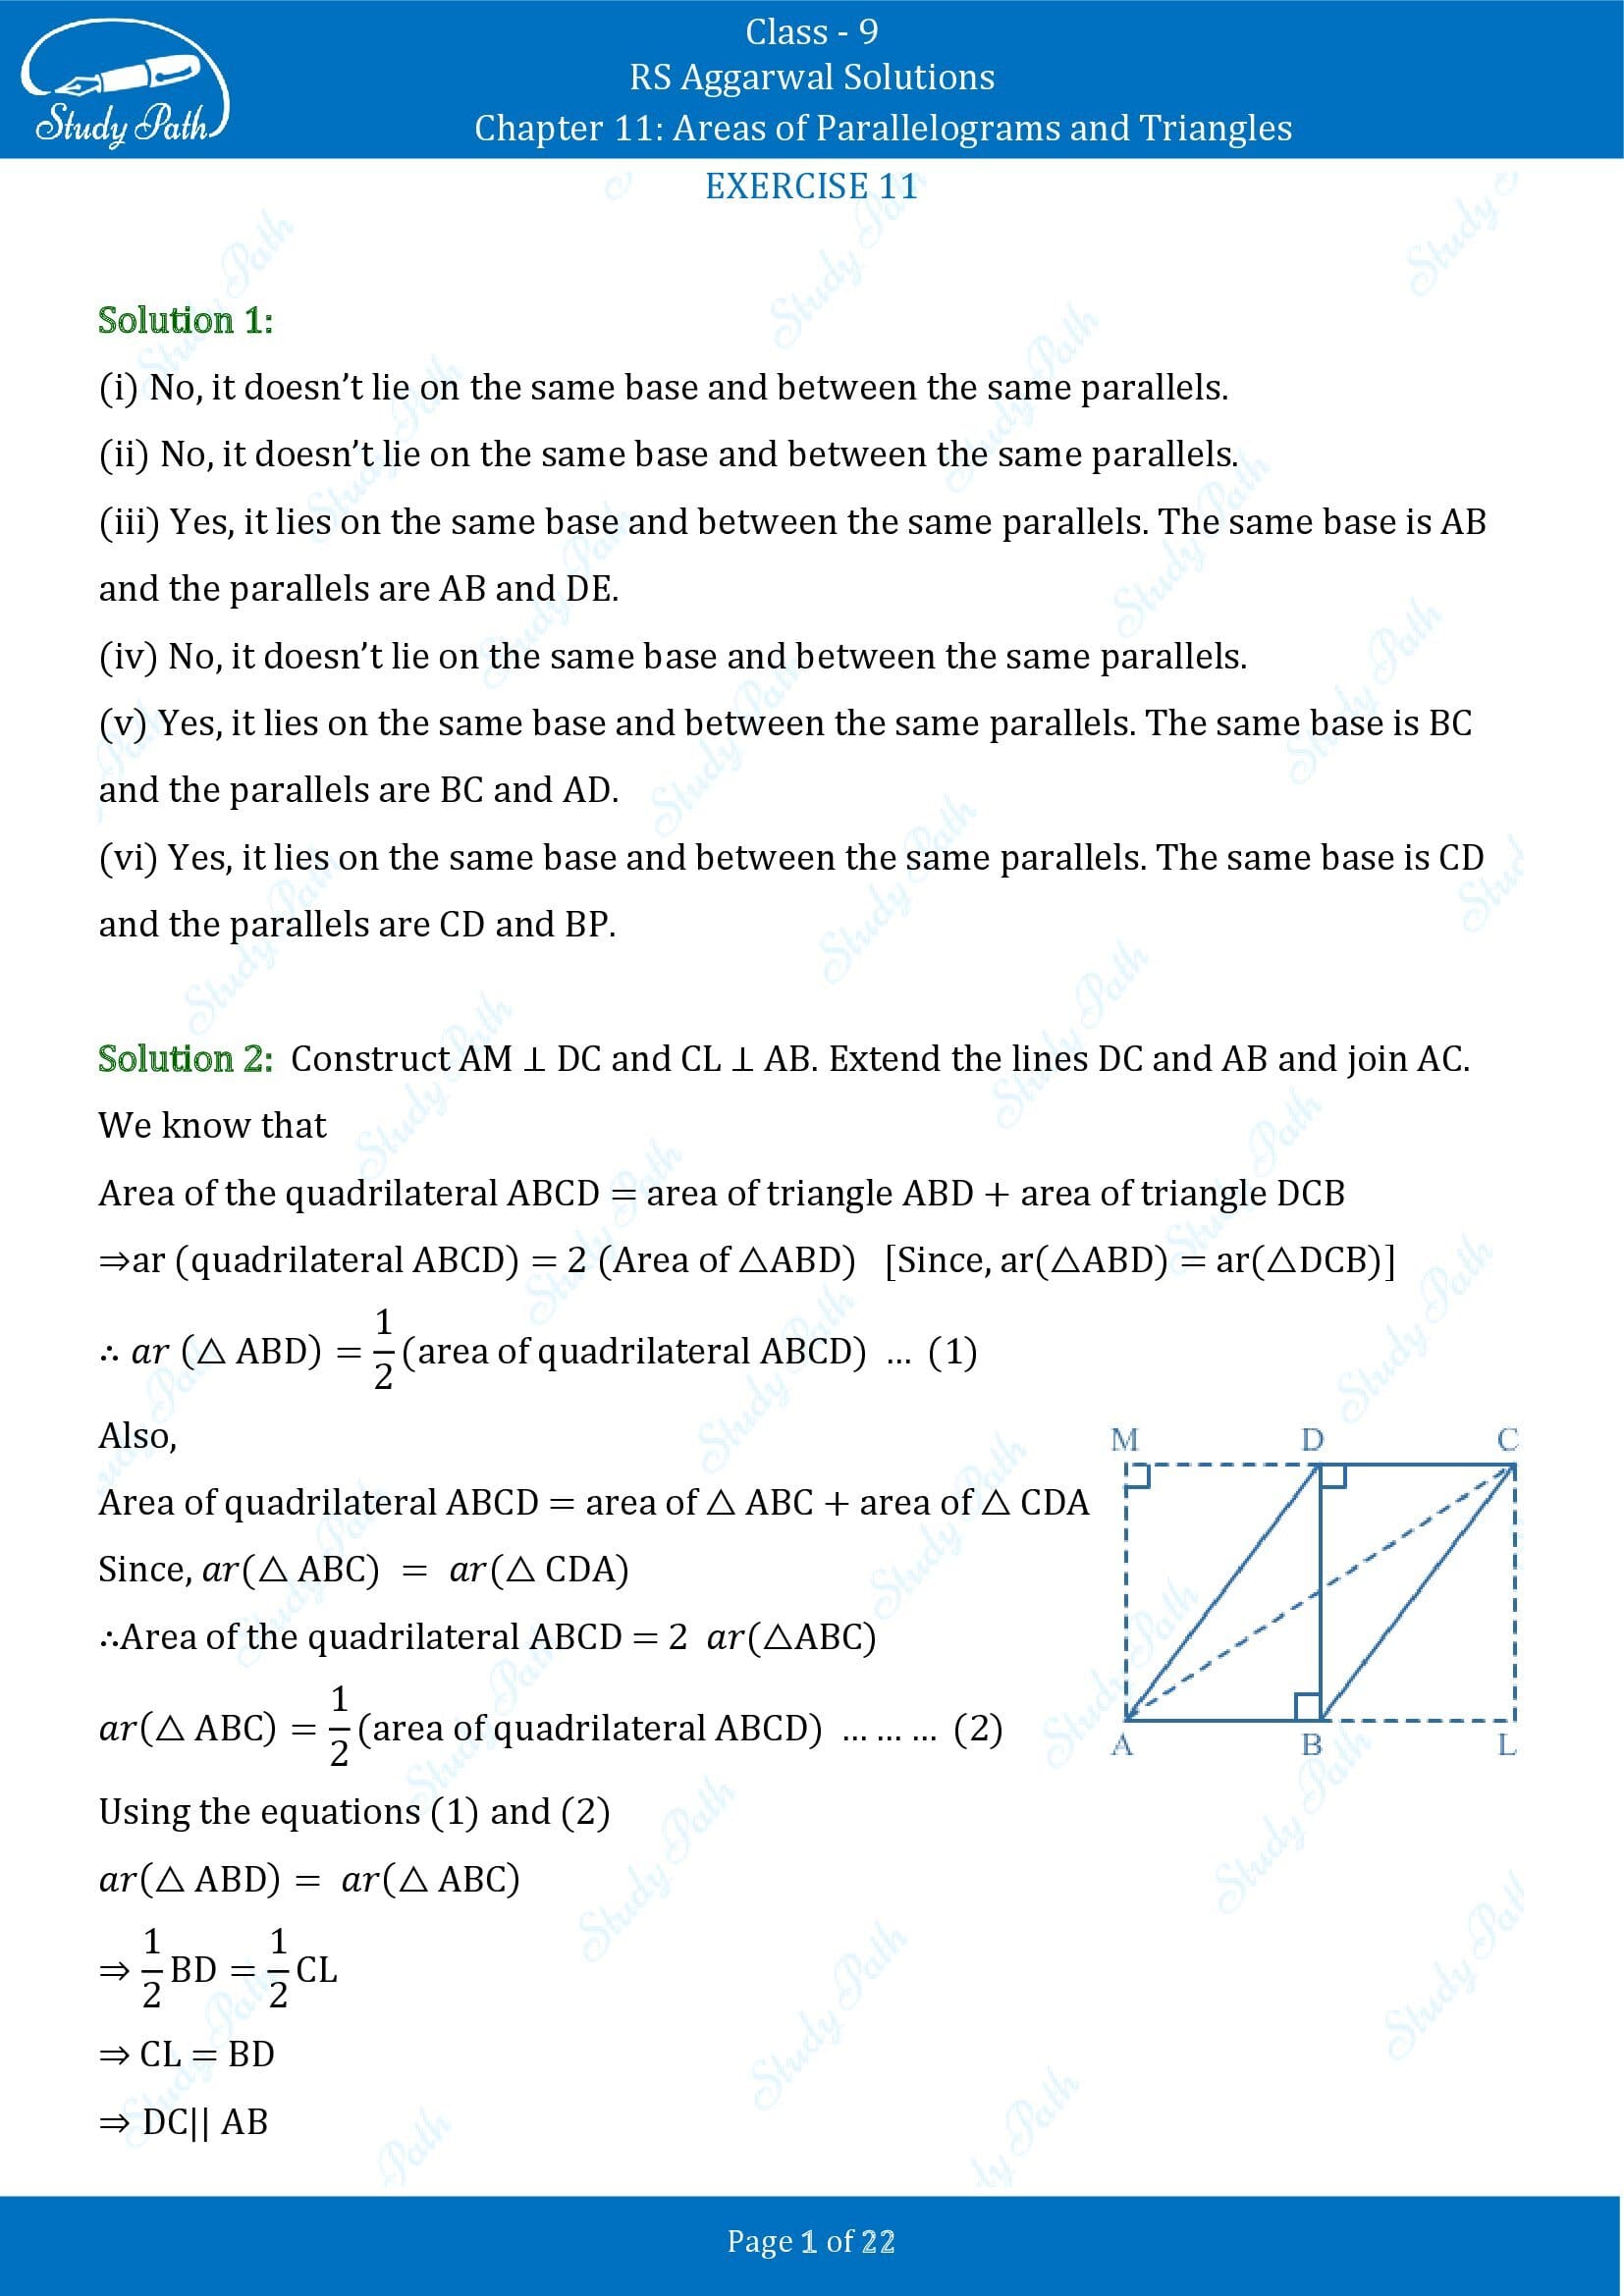 RS Aggarwal Solutions Class 9 Chapter 11 Areas of Parallelograms and Triangles Exercise 11 00001